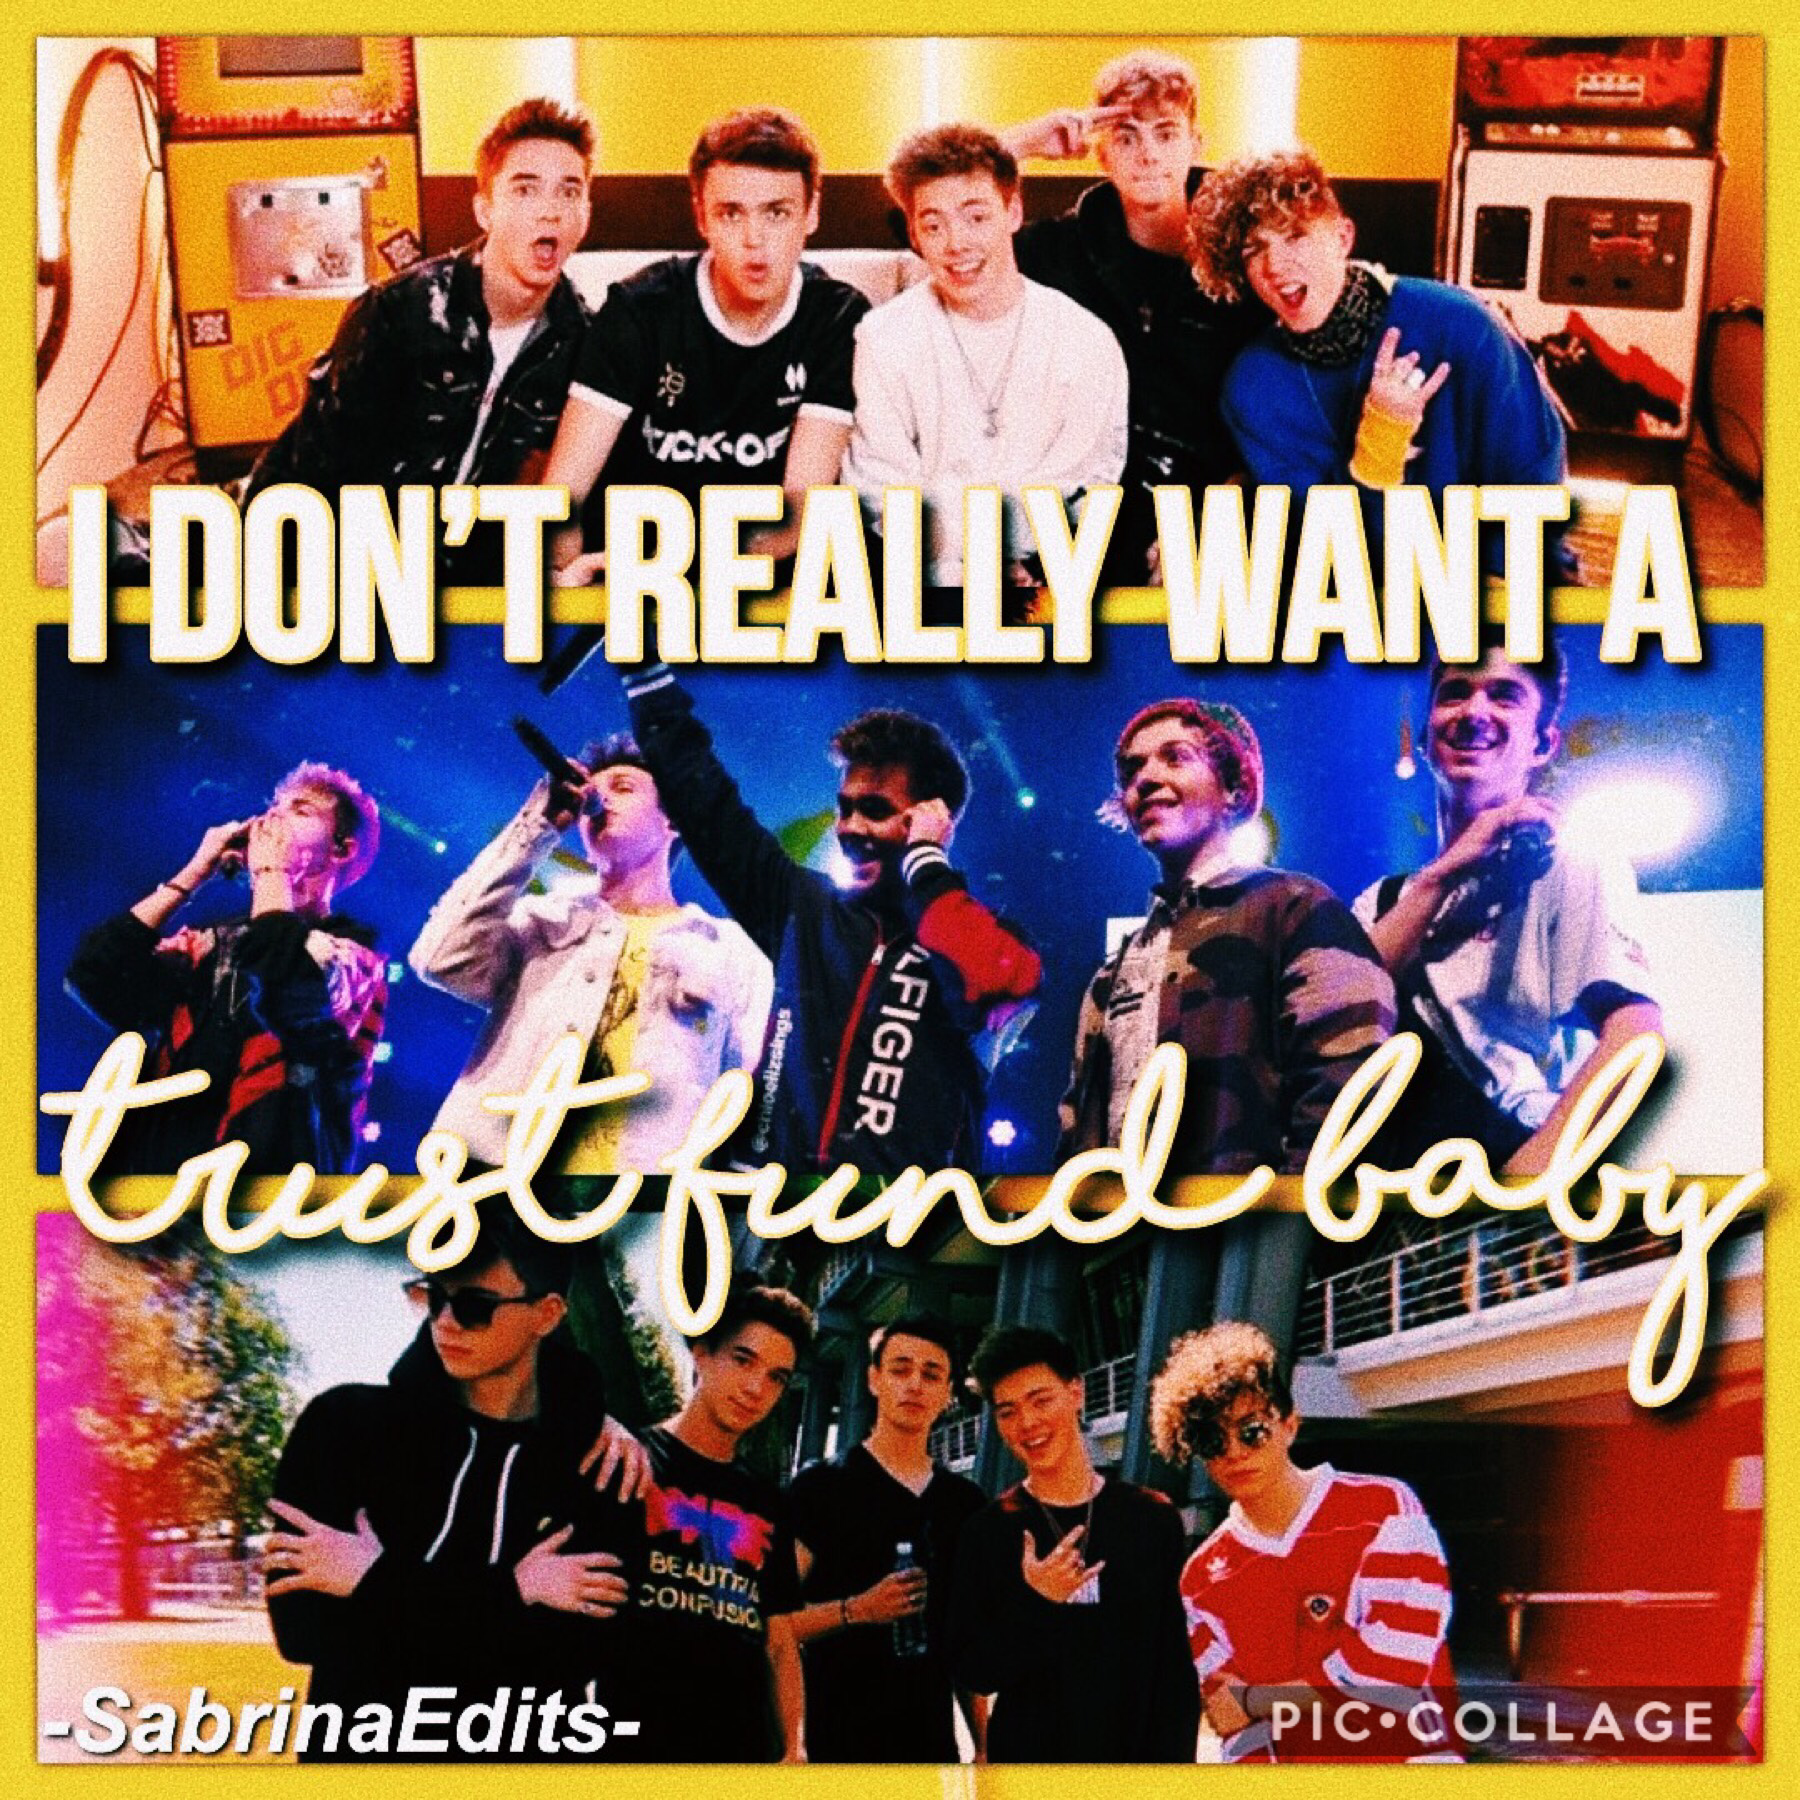 💛 Tap Here 💛
sorry about all of the why don’t we edits, i’m going to post some different stuff after this 😂💛

i hope you guys like this, rates?
i love you guys! 💛